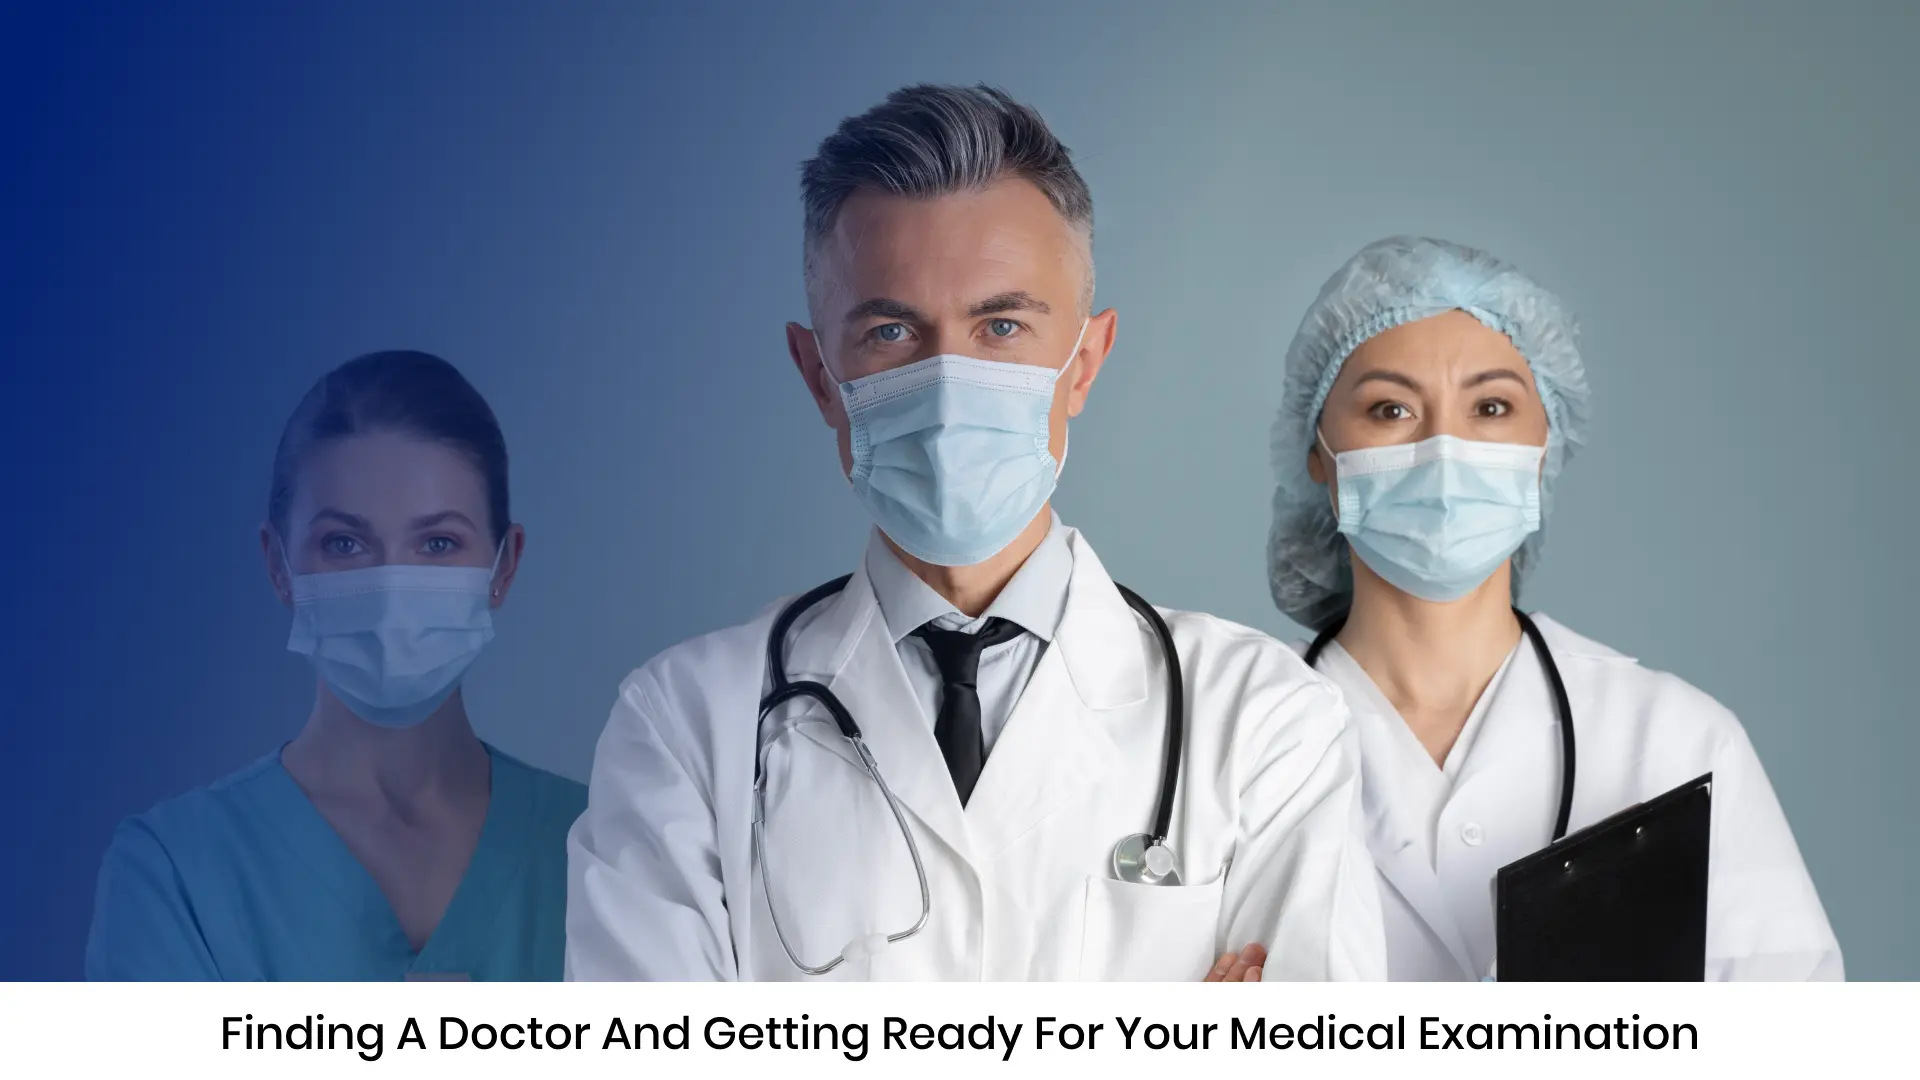 Finding a Doctor and Getting Ready for Your Medical Examination